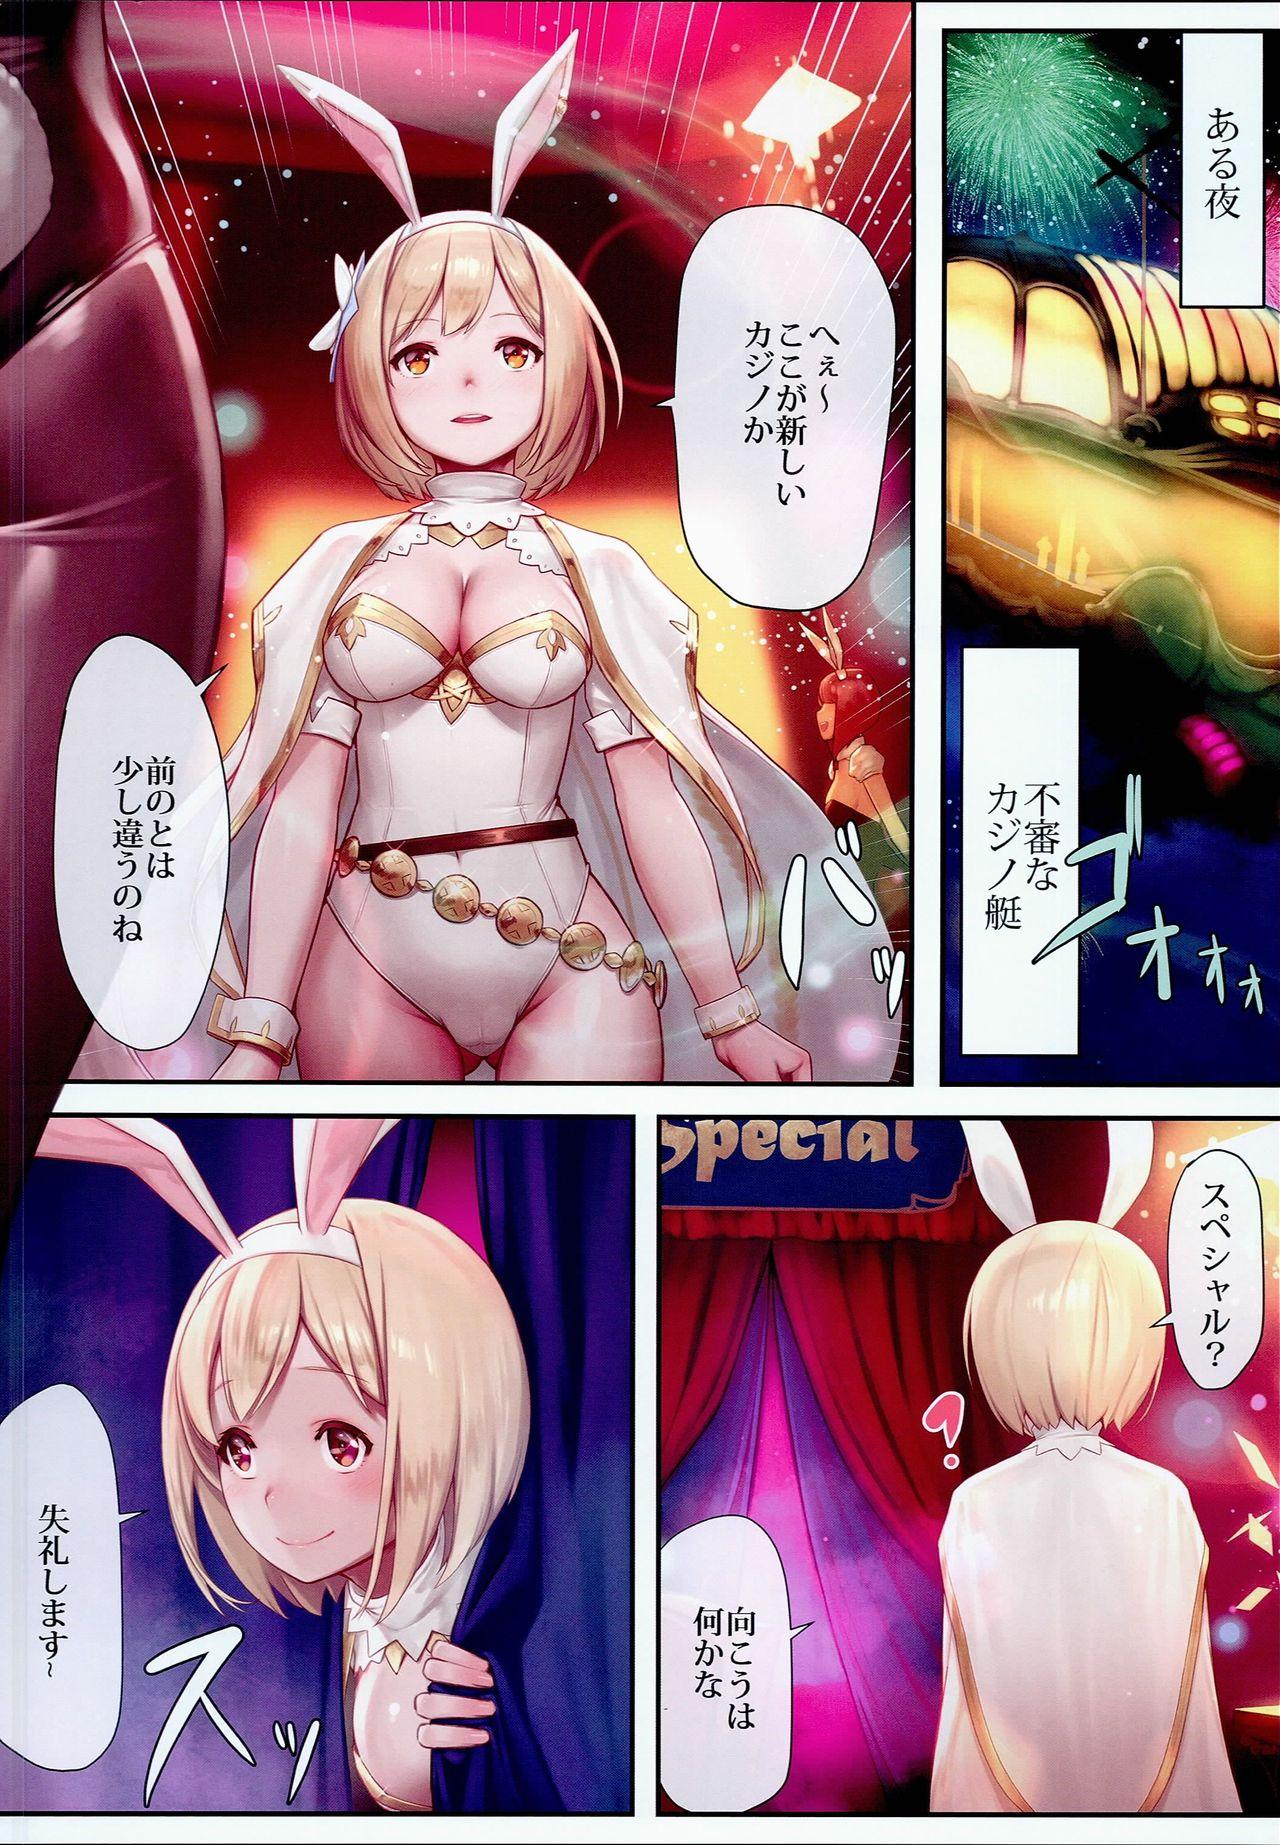 Beauty Gentle Blue Fantasy 3 - Granblue fantasy Action - Page 4